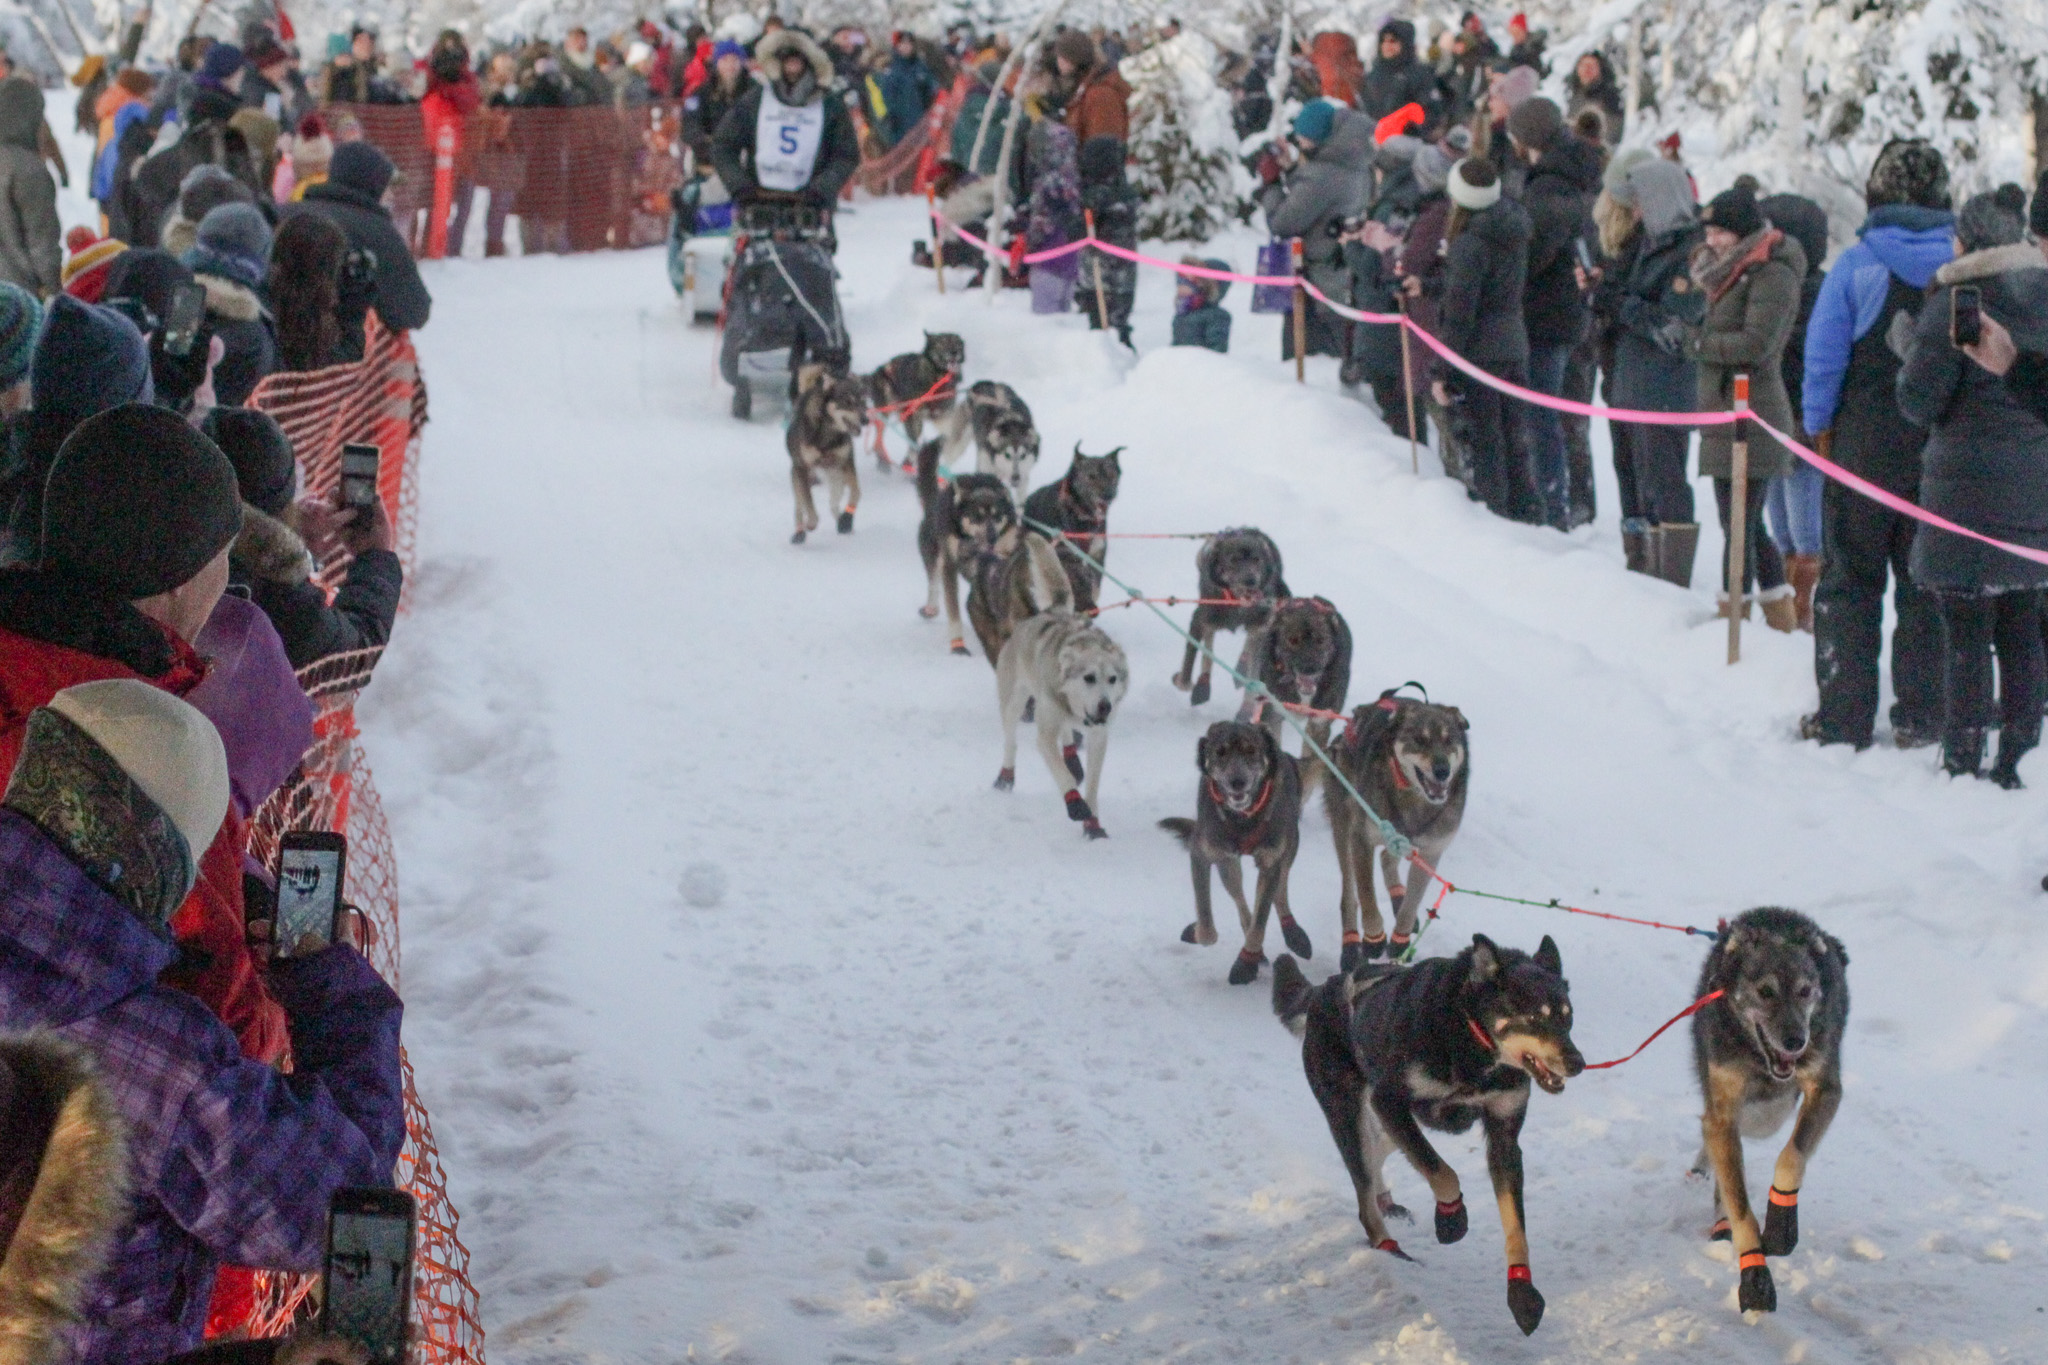 A dog team charges down the chute as crowds watch